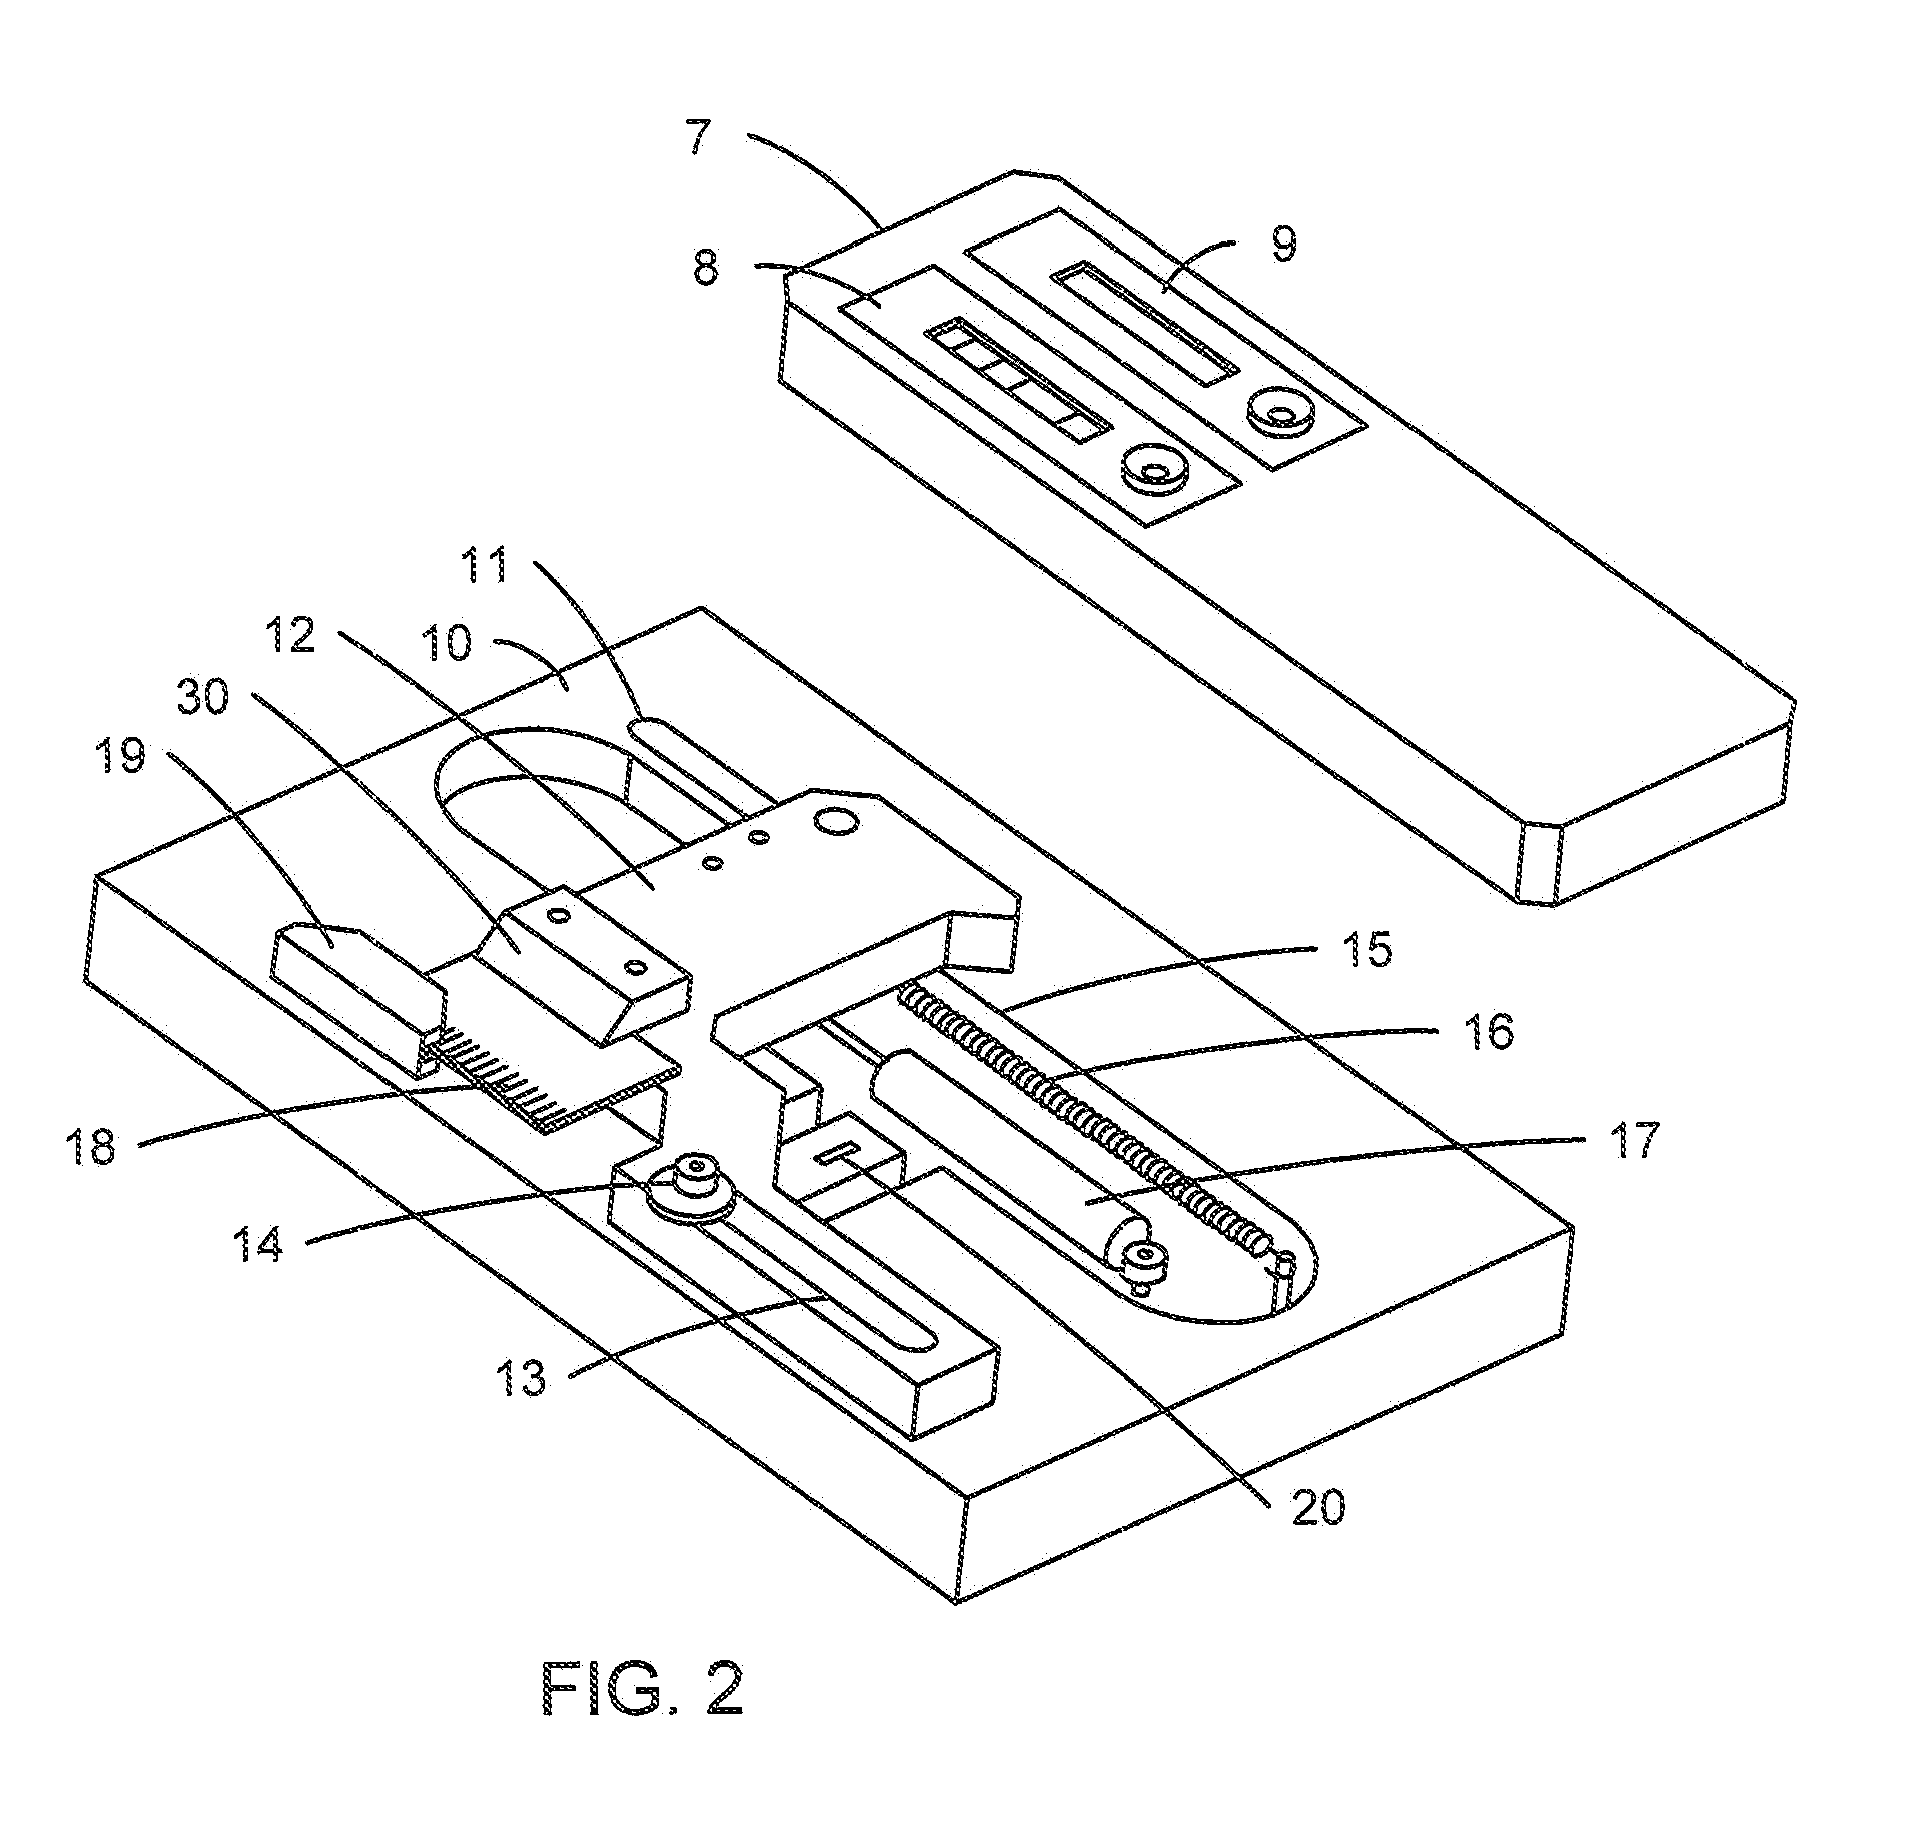 Method and apparatus for reading test strips